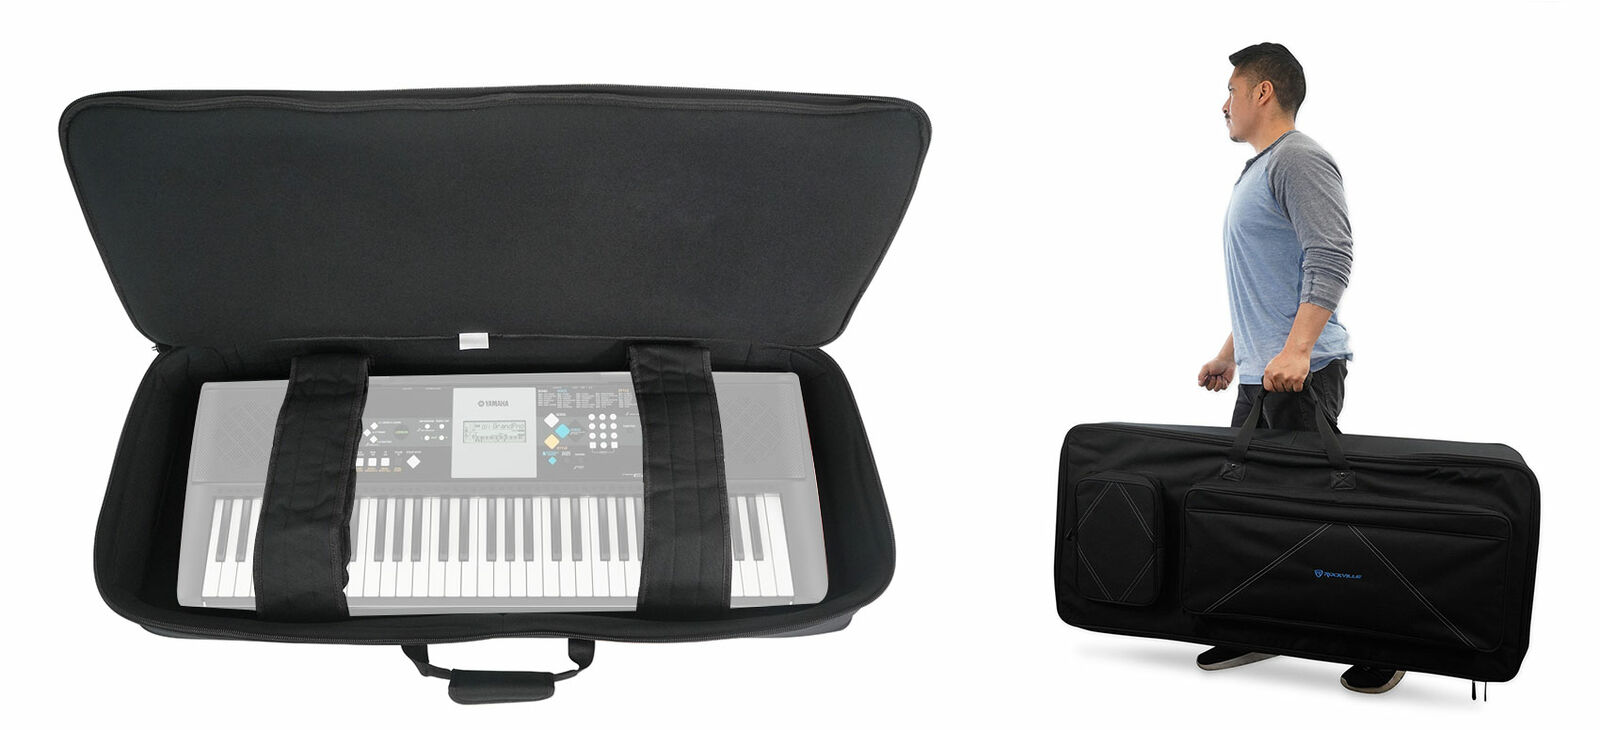 Super special price Rockville 61 Key Padded Rigid Durable Bag For Gig New York Mall Keyboard Case